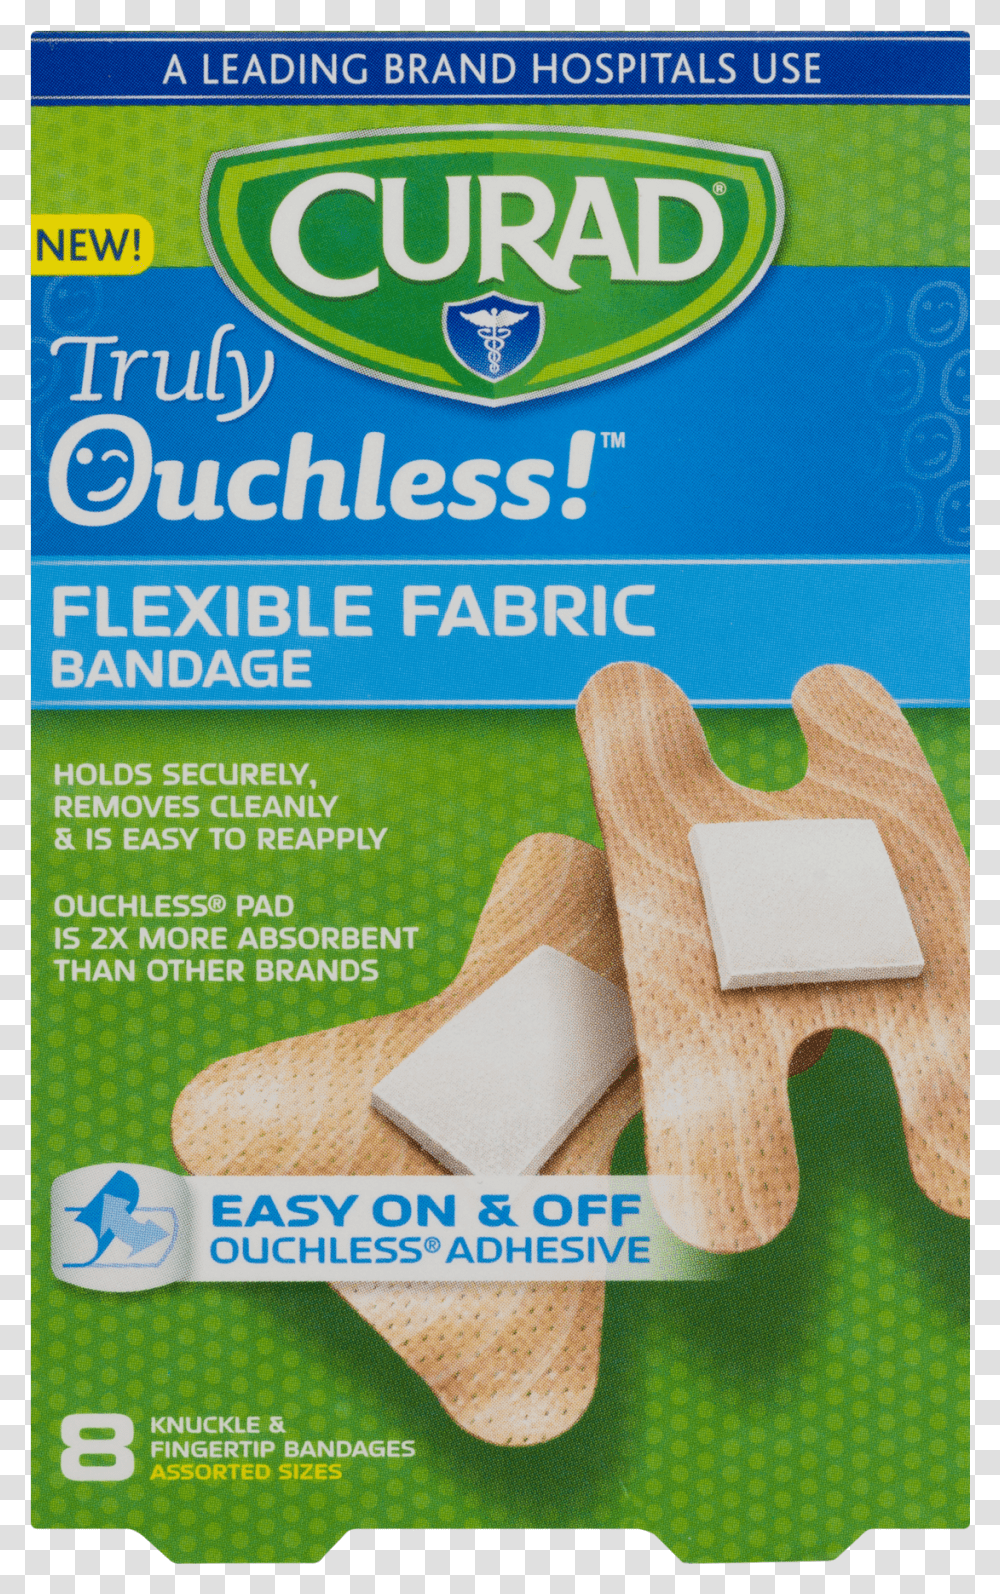 Curad Truly Ouchless Flexible Fabric Bandages Transparent Png